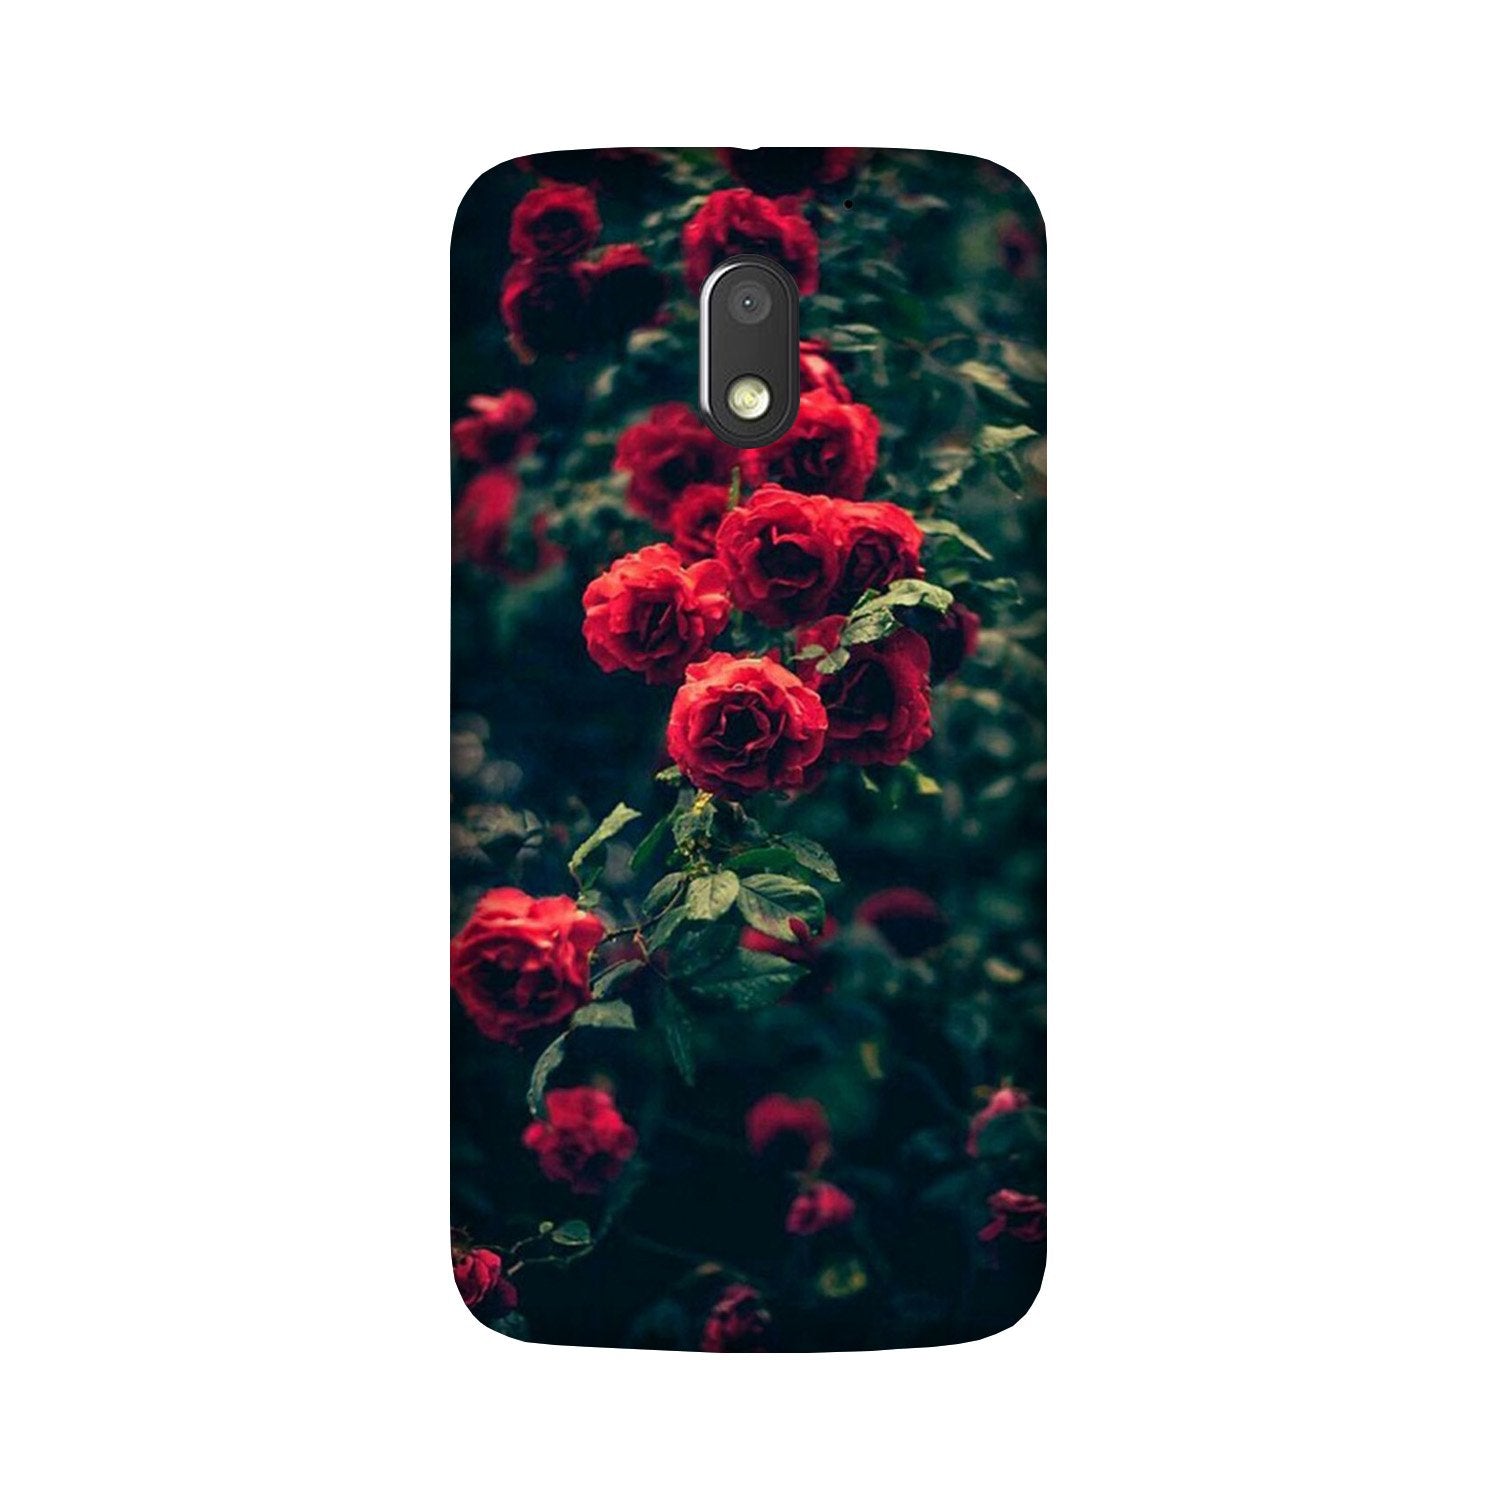 Red Rose Case for Moto G4 Play